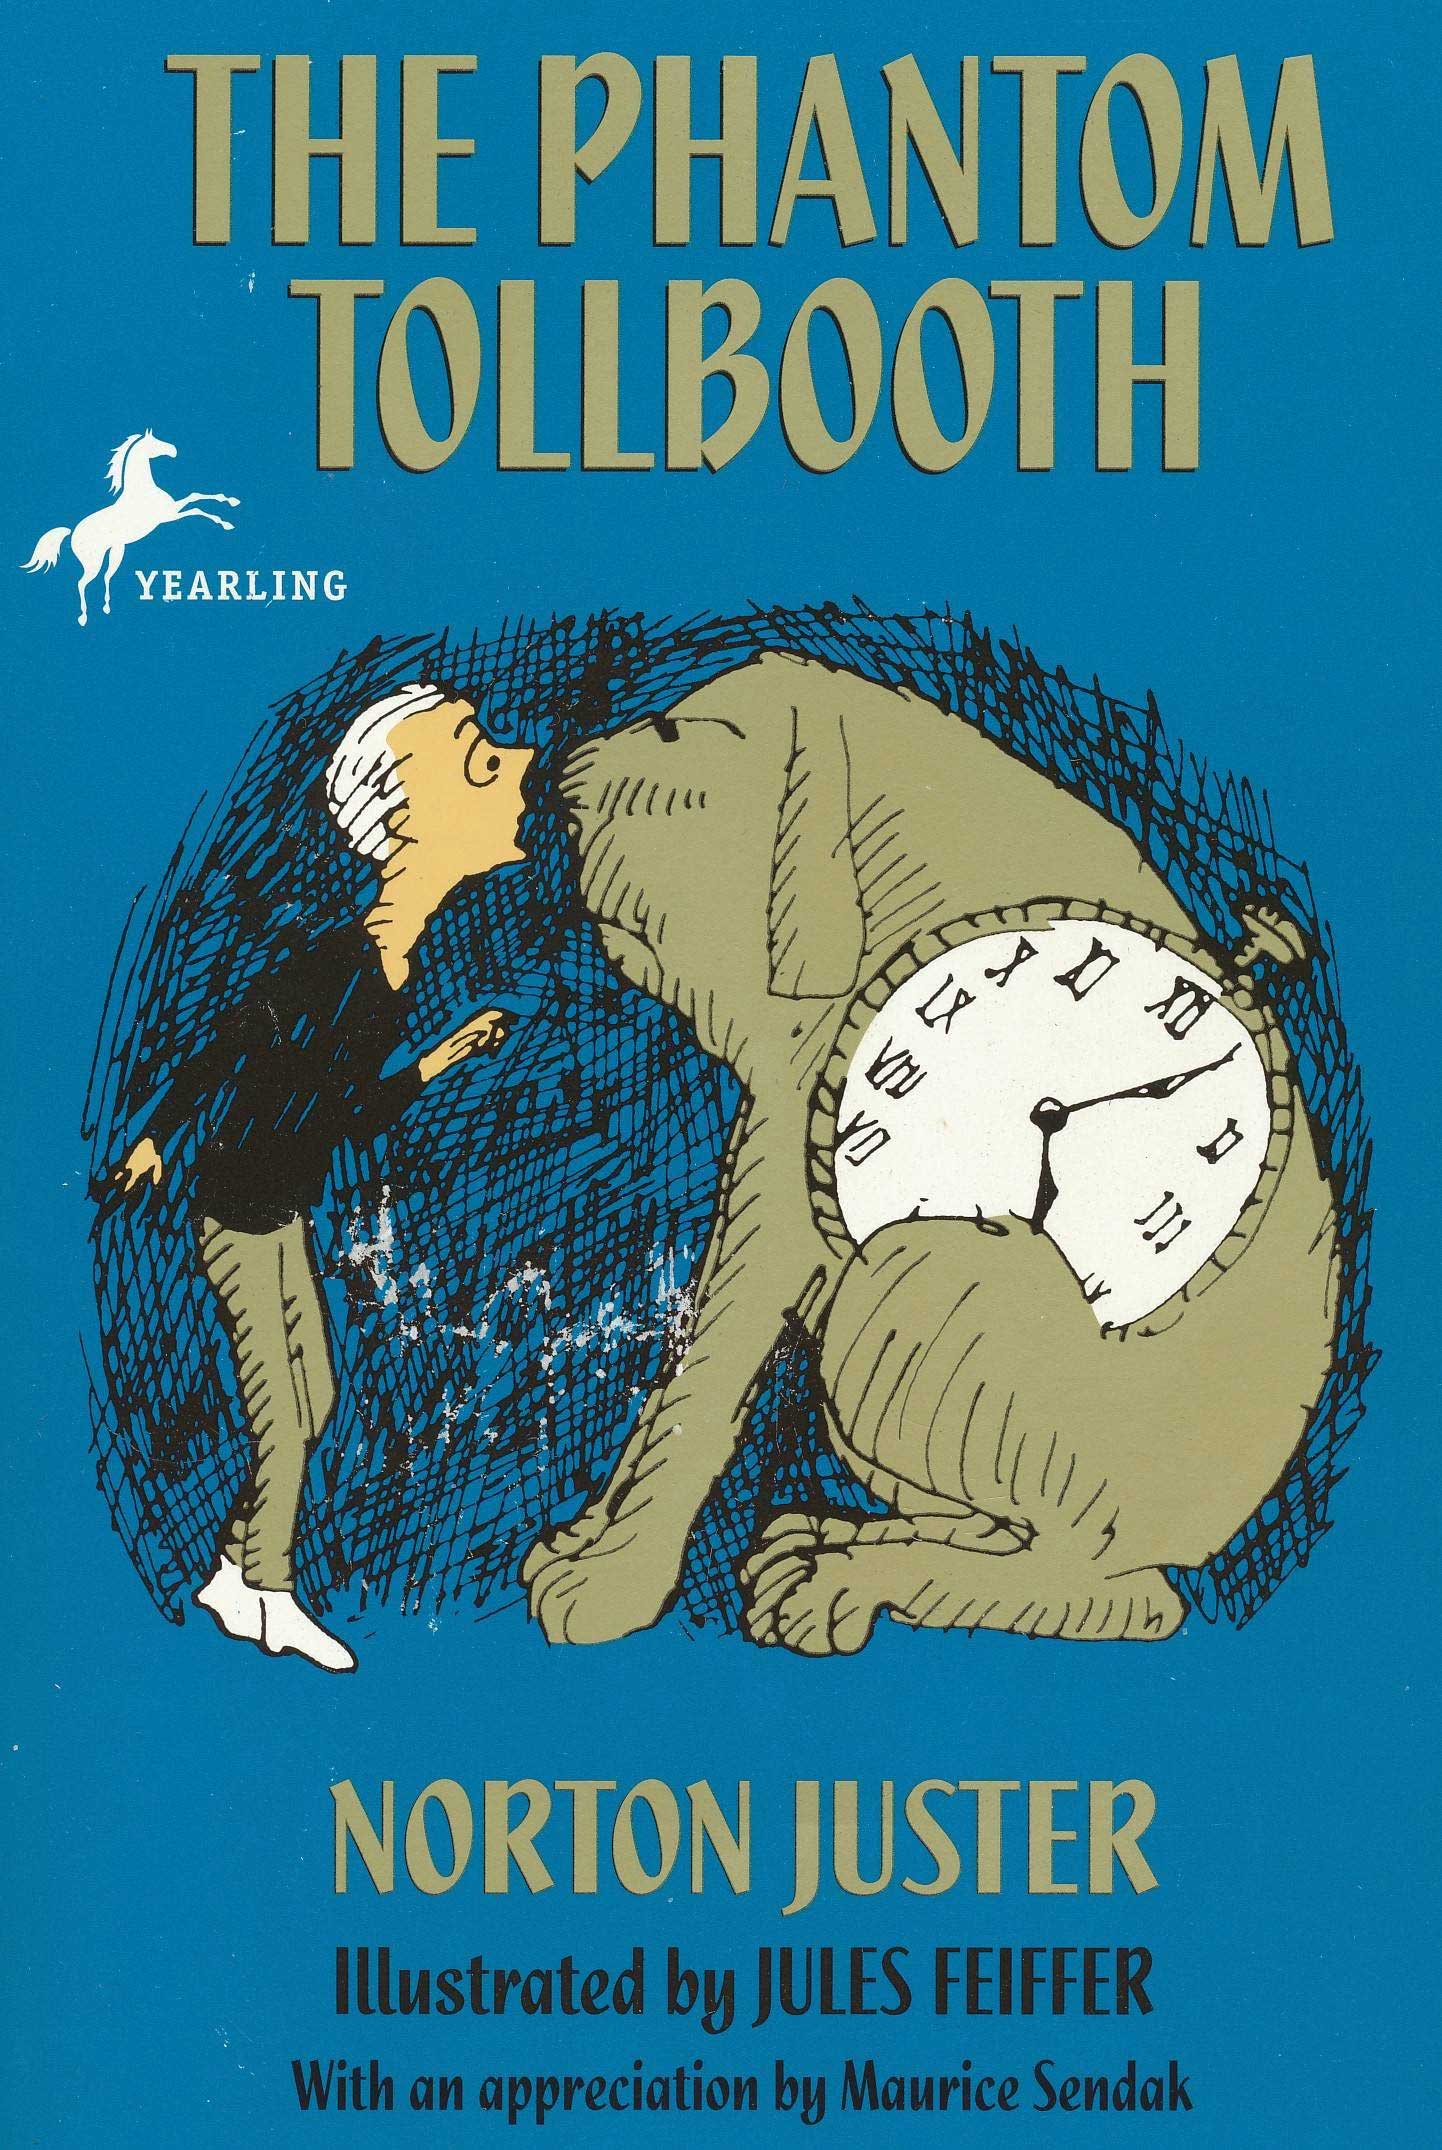 The Phantom Tollbooth, by Norton Juster. 
                              
                              
                              
                              In a witty, sharp fairy tale that illuminates language and mathematics through a picaresque story of adventure in the Kingdom of Wisdom, Jules Feiffer’s whimsical drawings do as much as Juster’s plain-language
                              interpolations of complex ideas to carry readers through Digitopolis and the Mountains of Ignorance.
                              
                              
                              
                              Buy now: The Phantom Tollbooth